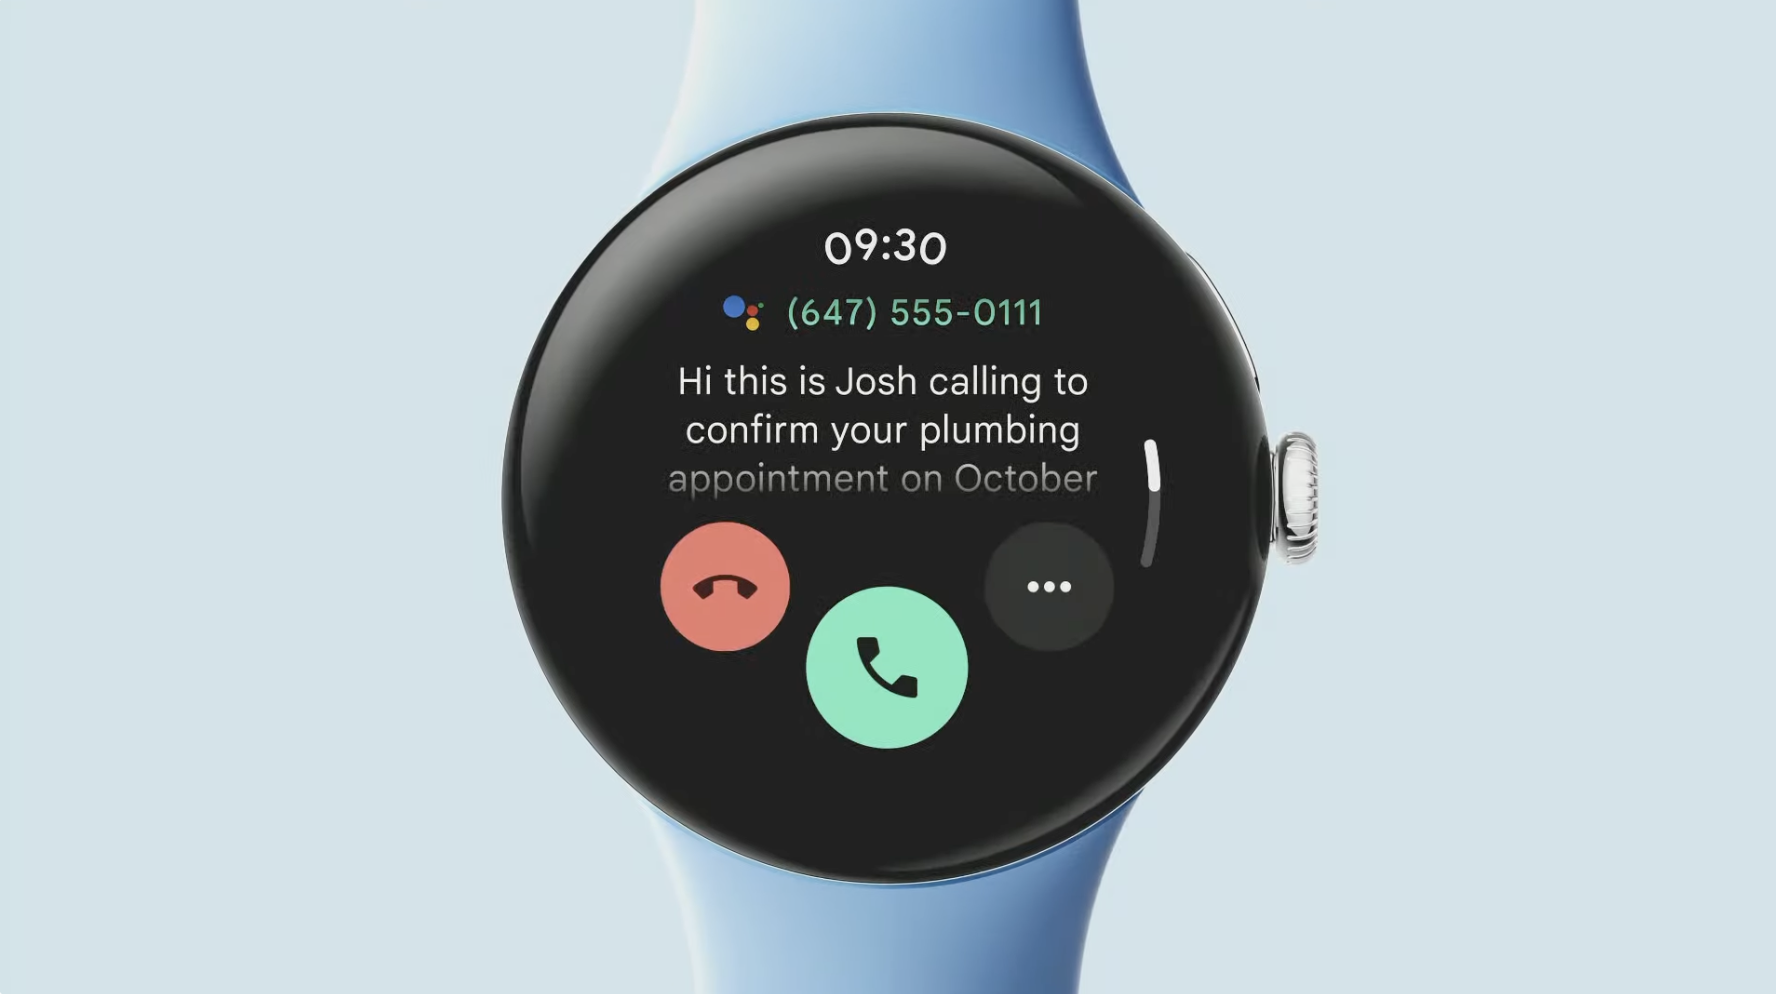 Google Pixel Watch 2: Price, new features, release date and more